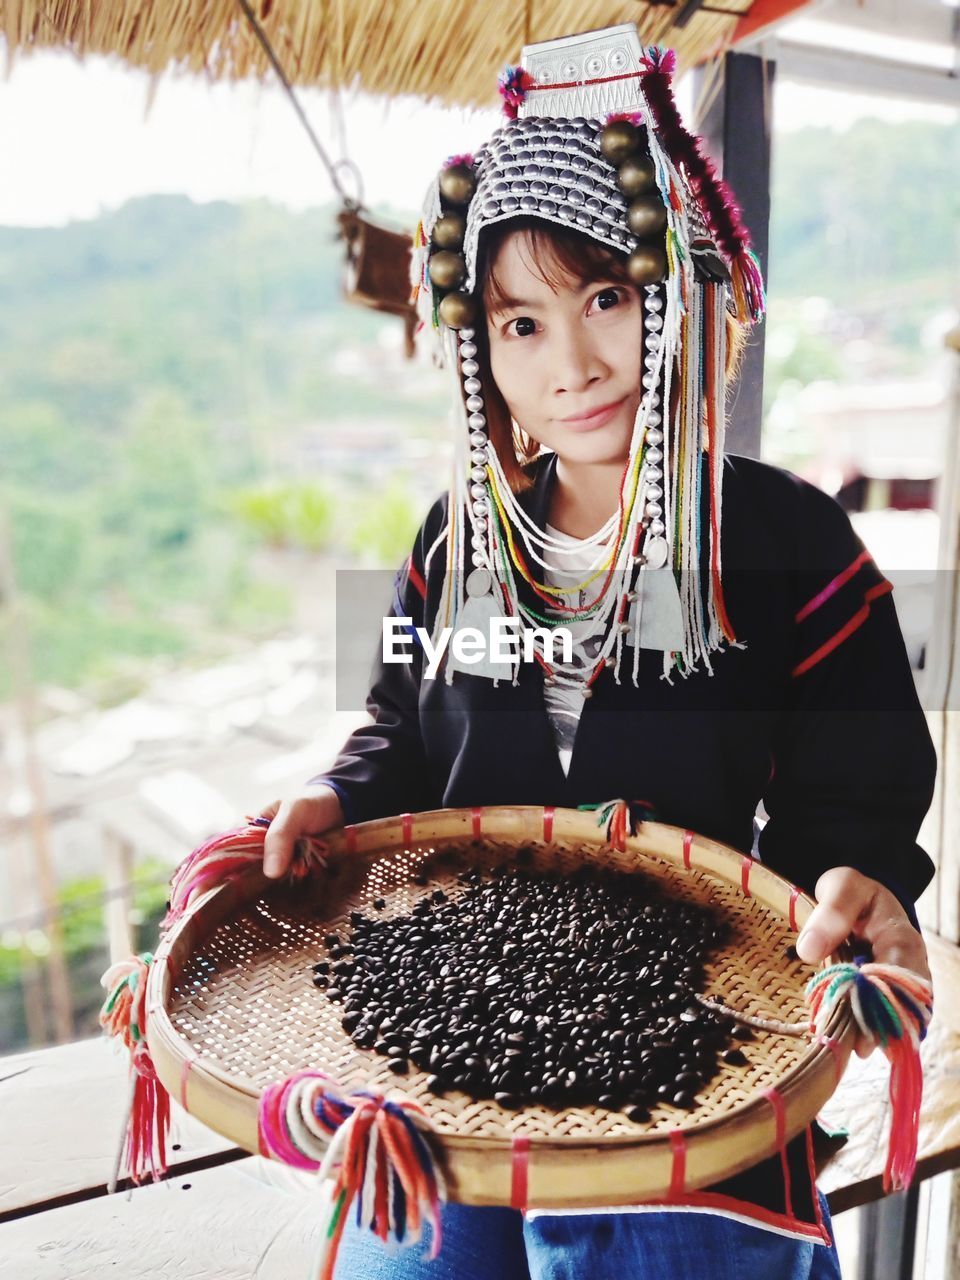 Portrait of woman holding basket with roasted coffee beans